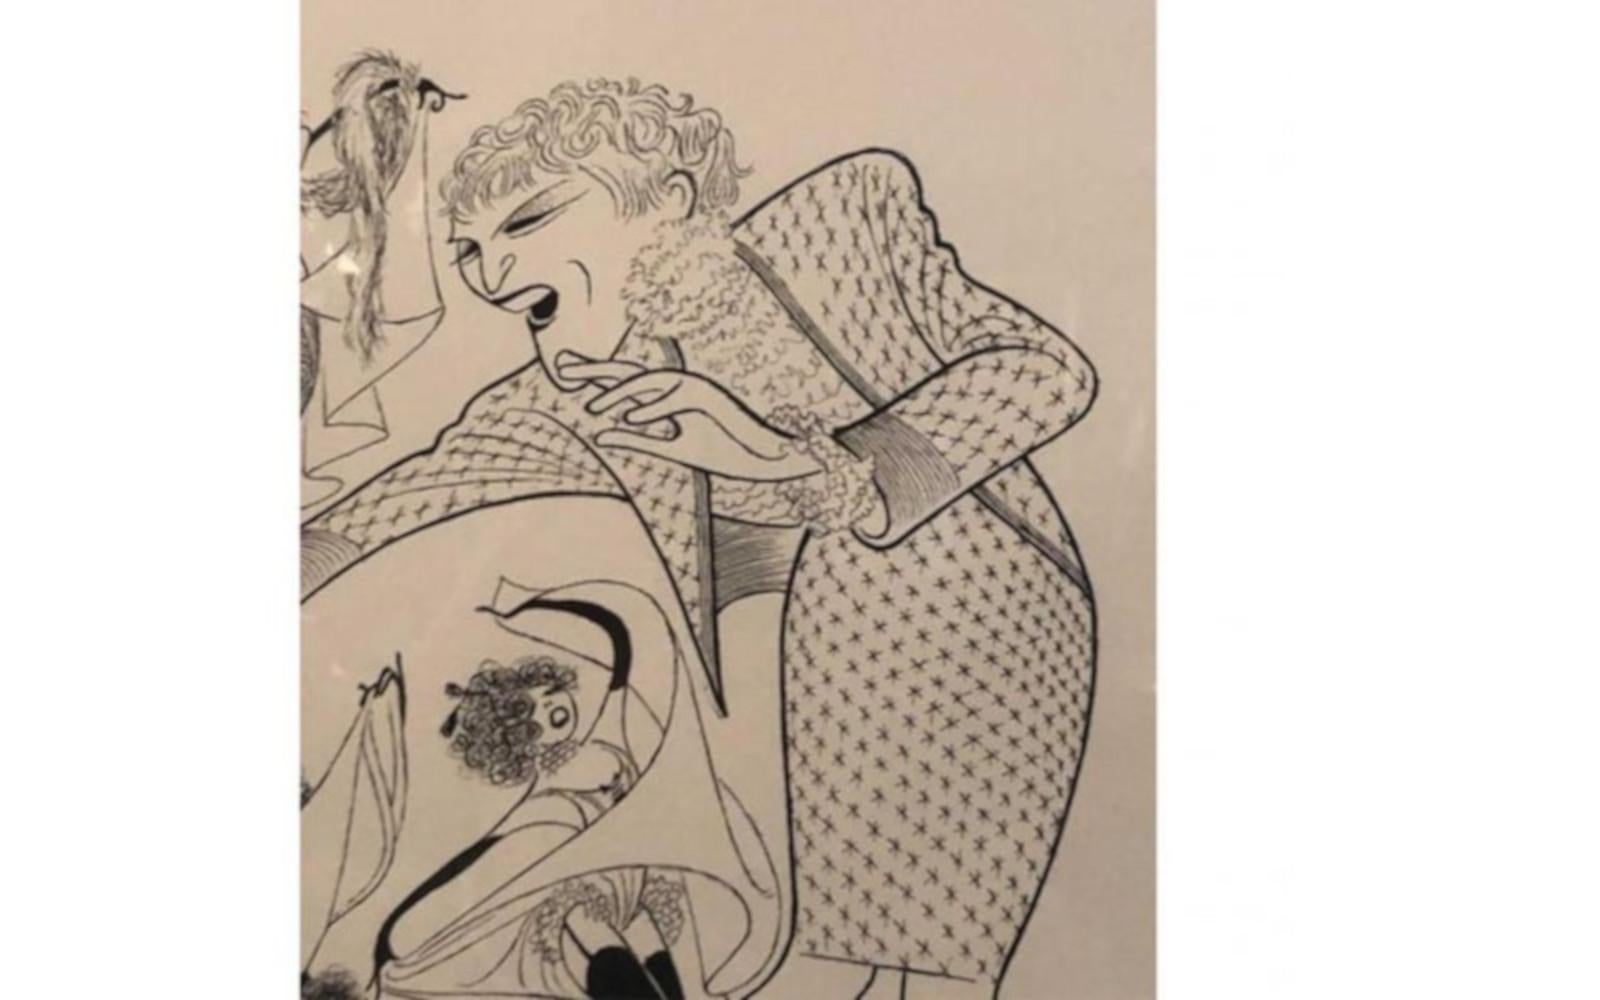 Al Hirschfeld (American, 1903-2003)
Glazed with acrylic.
Molded stained wood frame.
Signed and numbered AP XVIII of XXX.

Dimensions:
Outside frame height 25